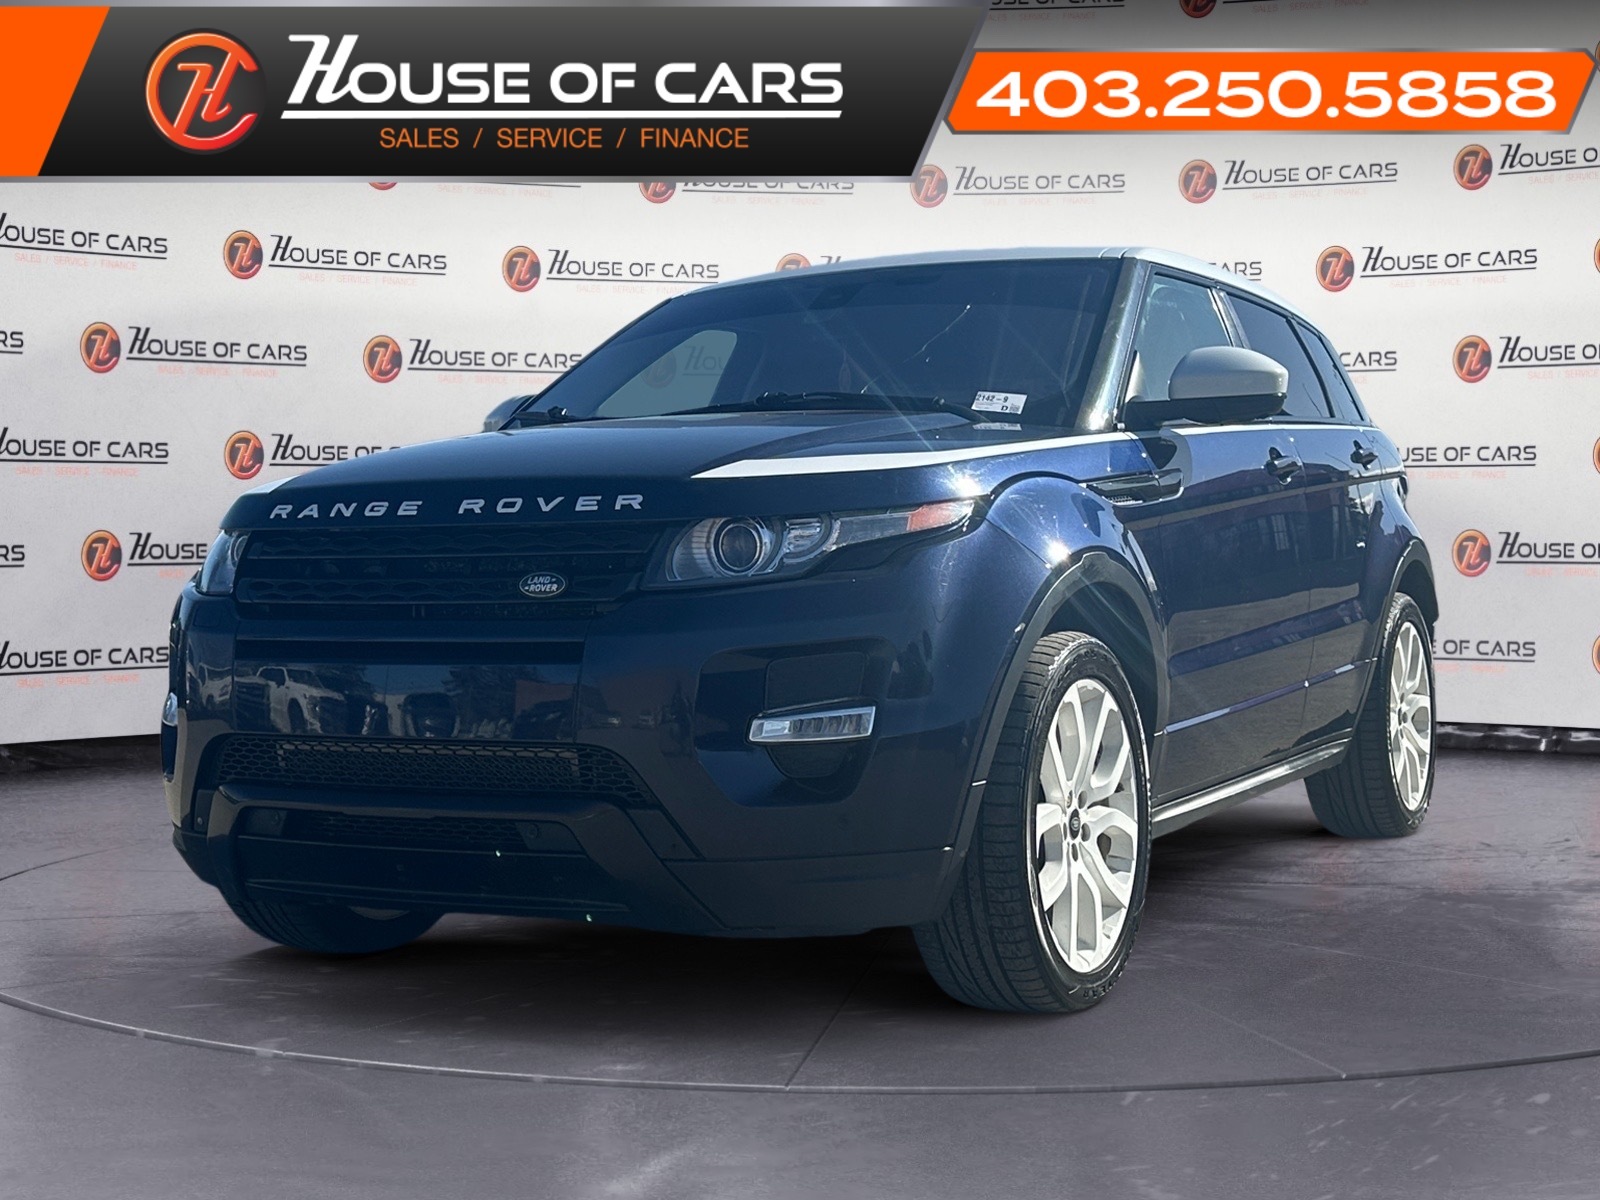 2015 Land Rover Range Rover Evoque 5dr HB Dynamic (MECHANIC SPECIAL)